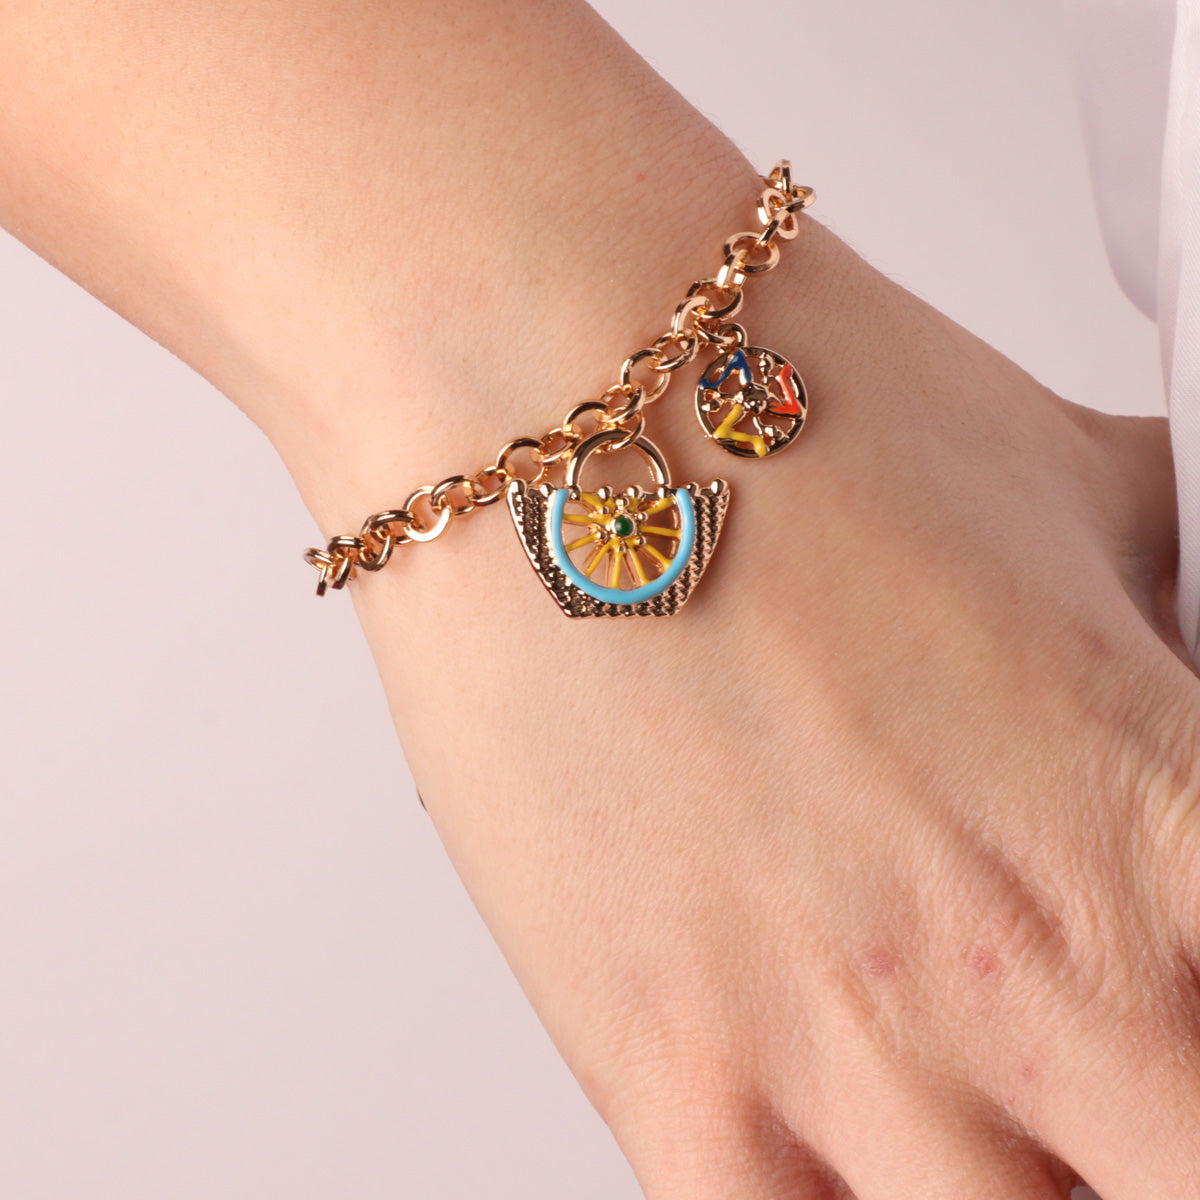 Metal bracelet in Rolò jersey with charm Coffa and Trinacria embellished with colored glazes